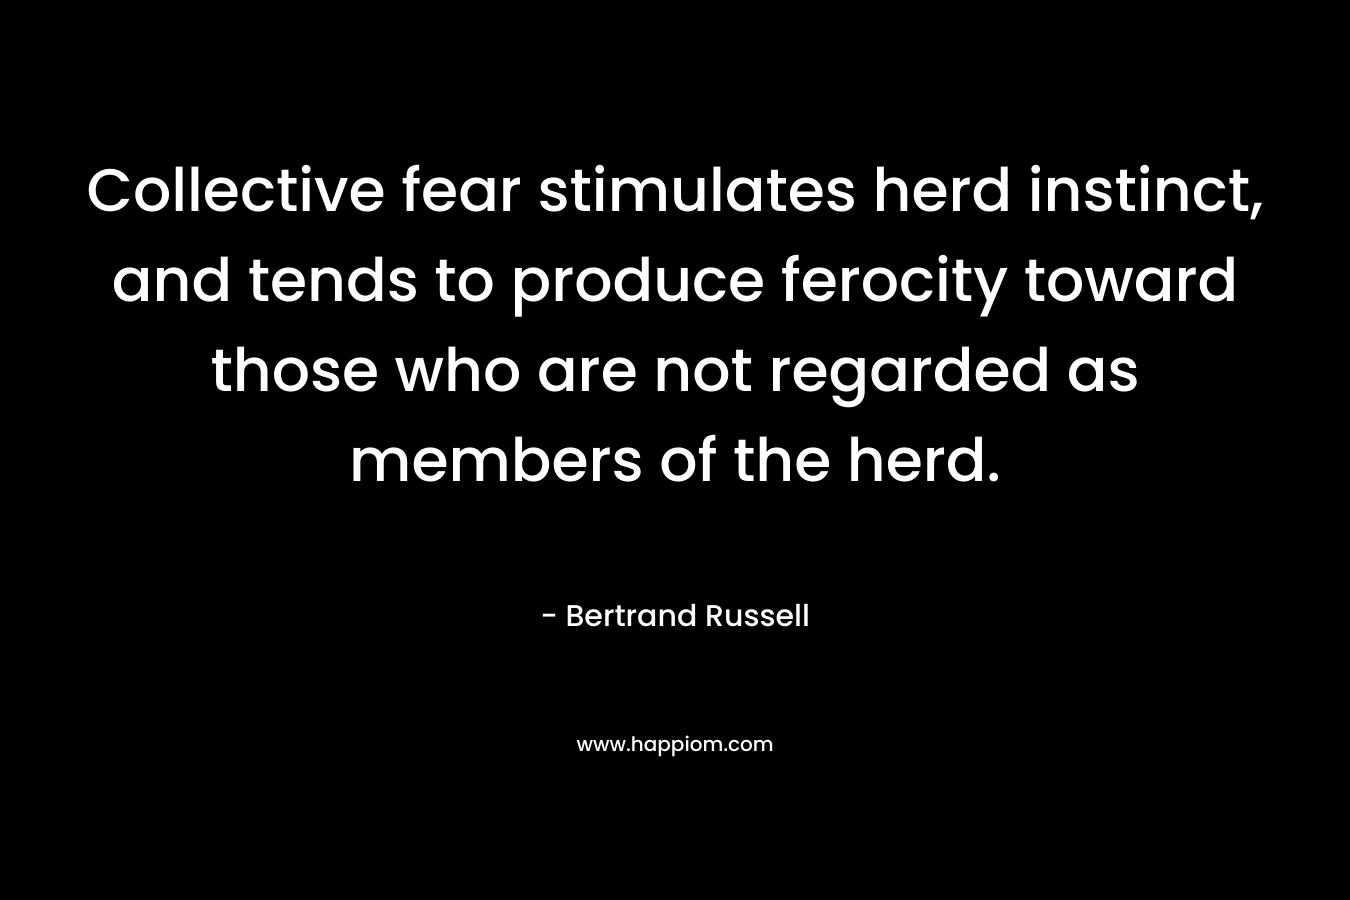 Collective fear stimulates herd instinct, and tends to produce ferocity toward those who are not regarded as members of the herd.